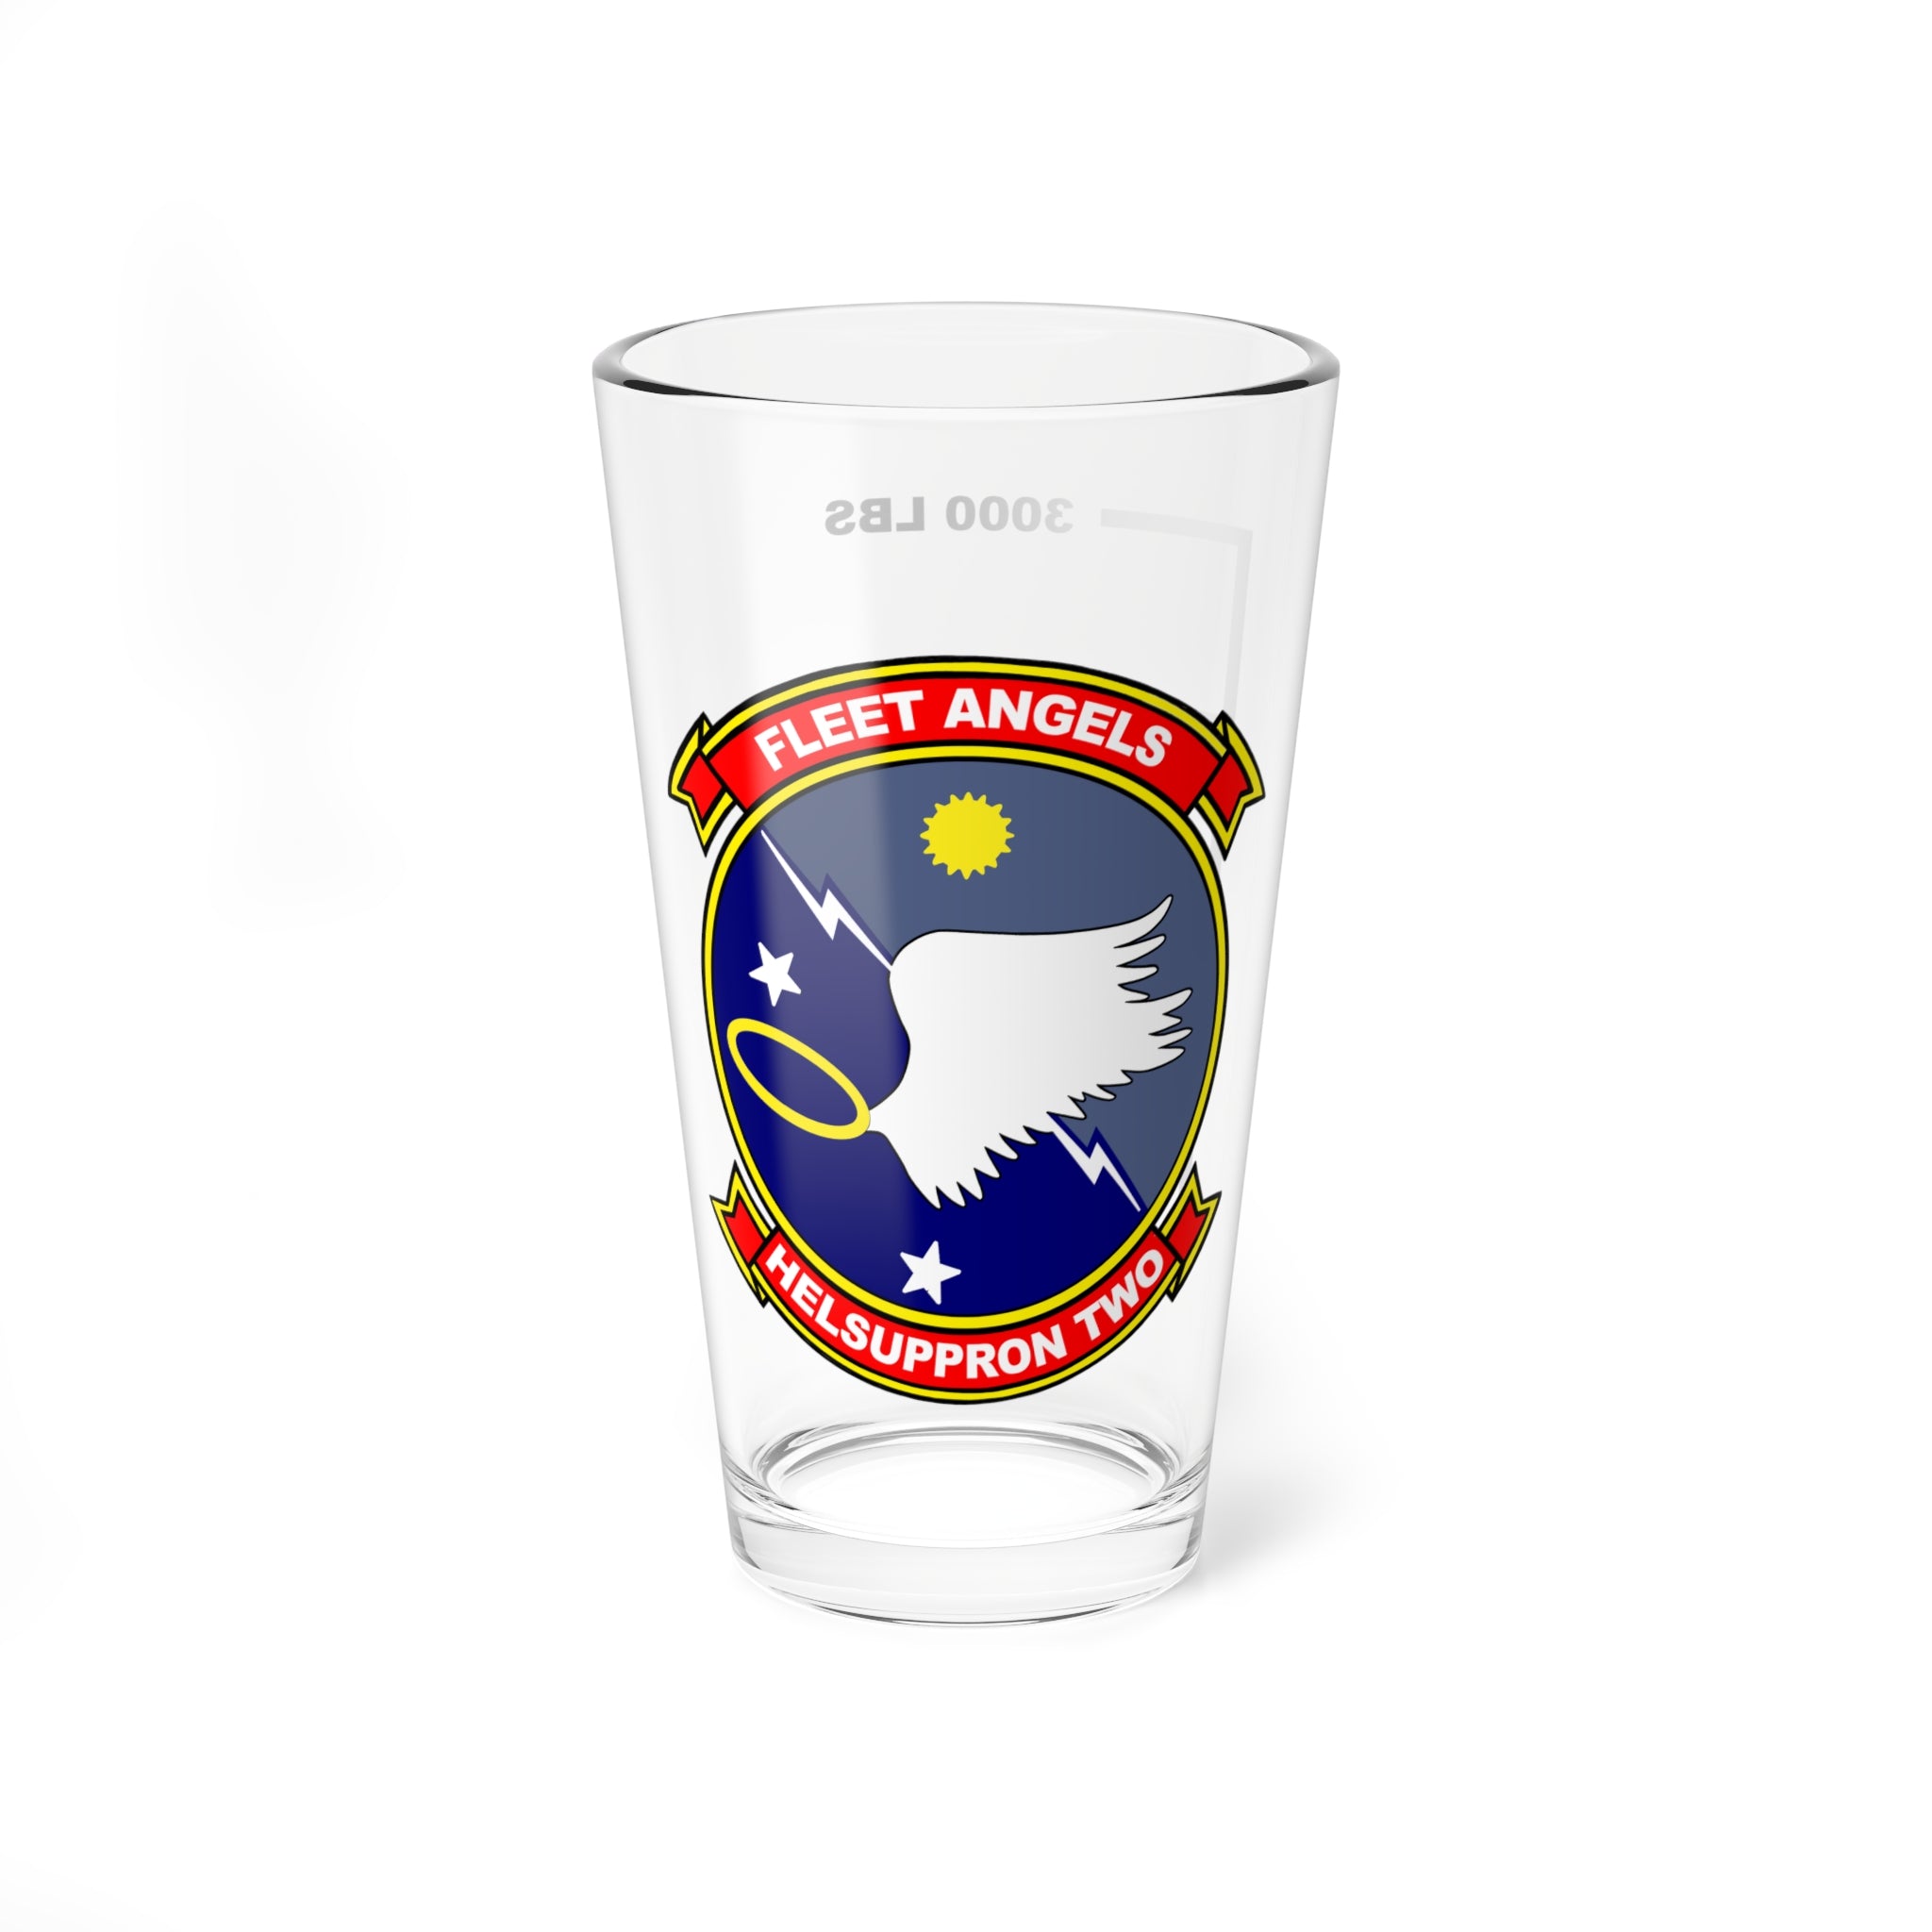 HC-2 "Fleet Angels"  Fuel Low Pint Glass, Navy Helicopter Fleet Support Squadron flying the HH-3 Sea King